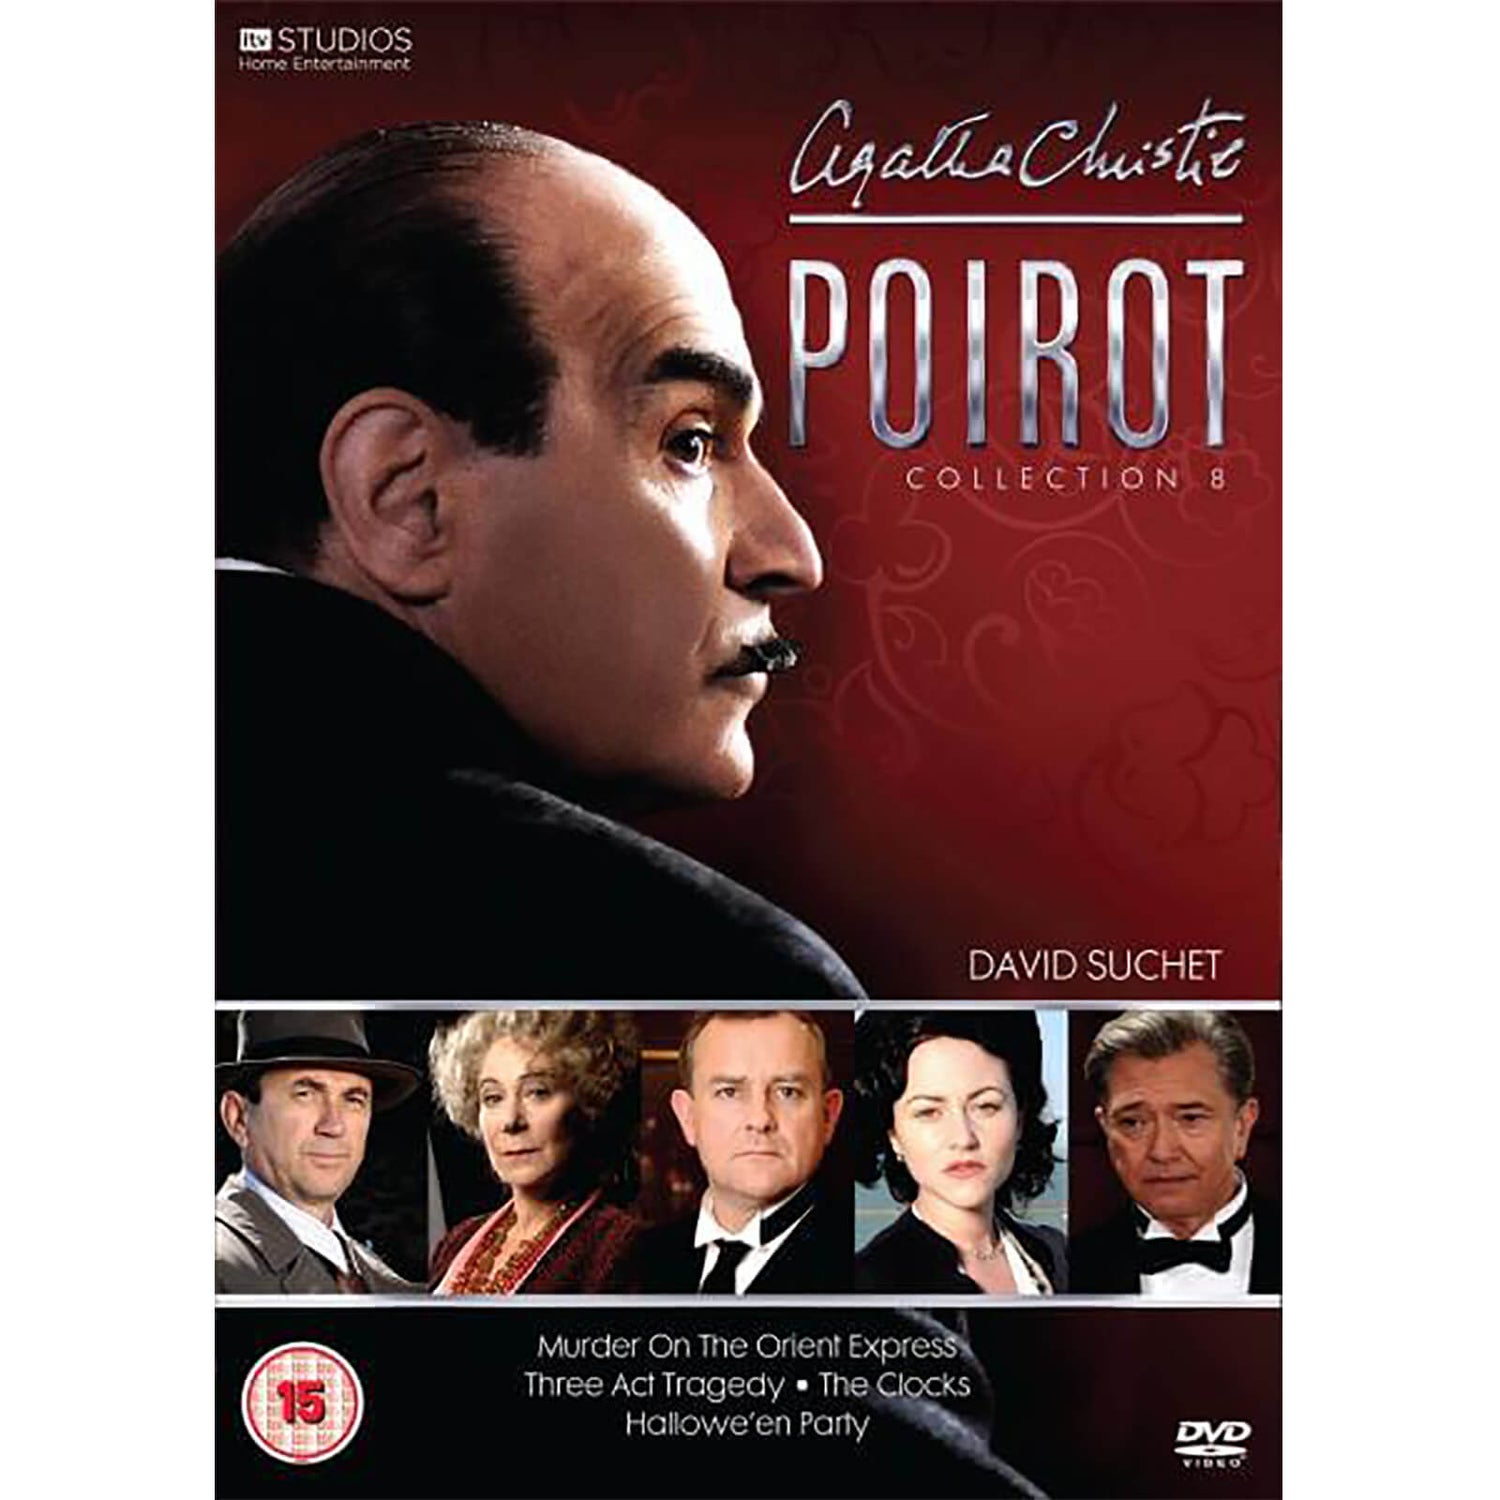 Poirot : Collection 8